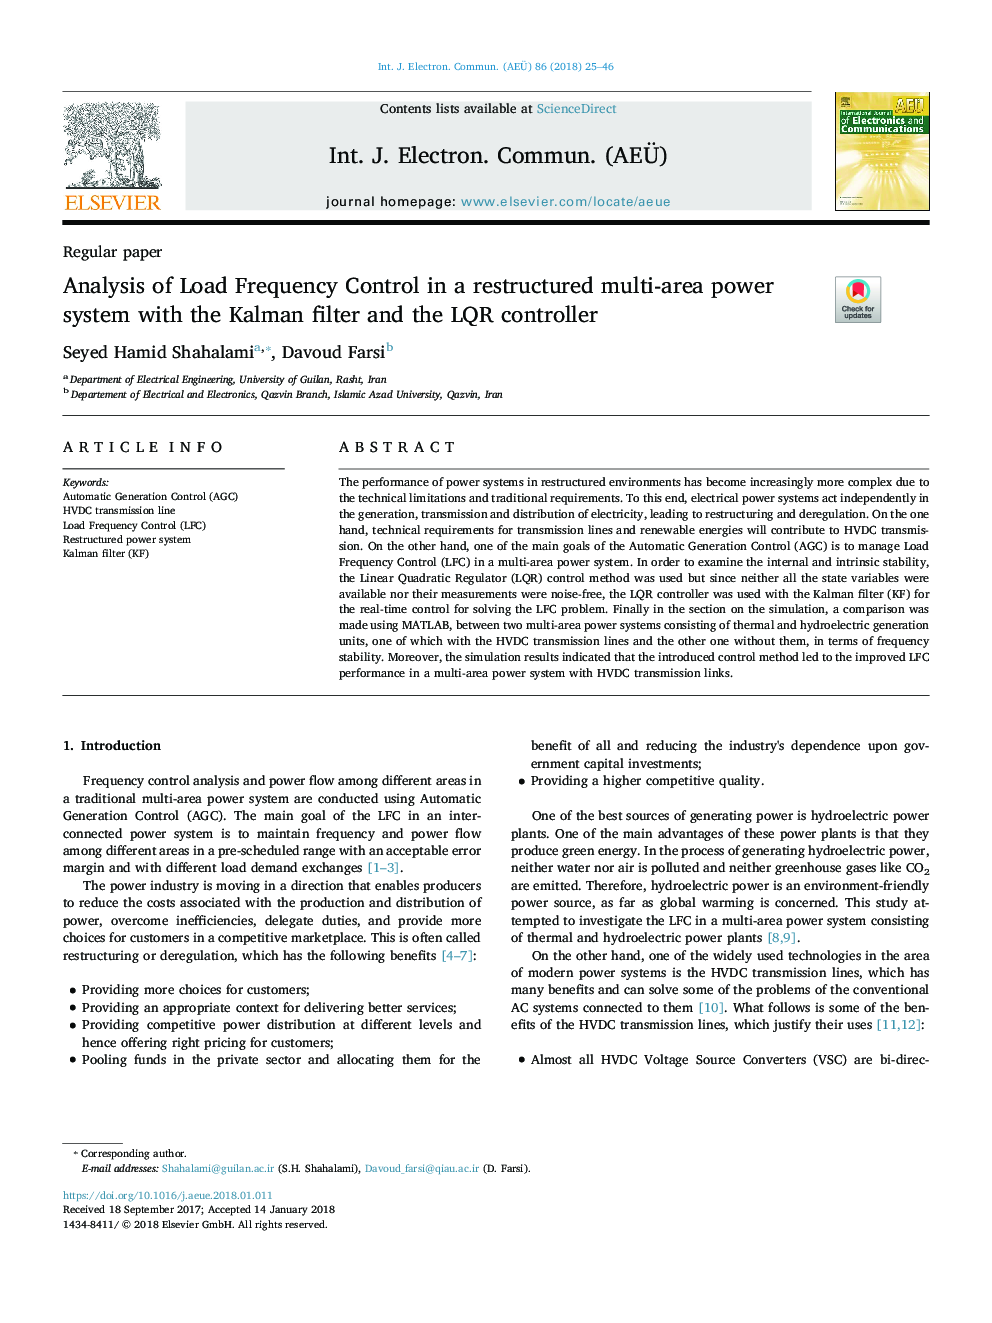 Analysis of Load Frequency Control in a restructured multi-area power system with the Kalman filter and the LQR controller